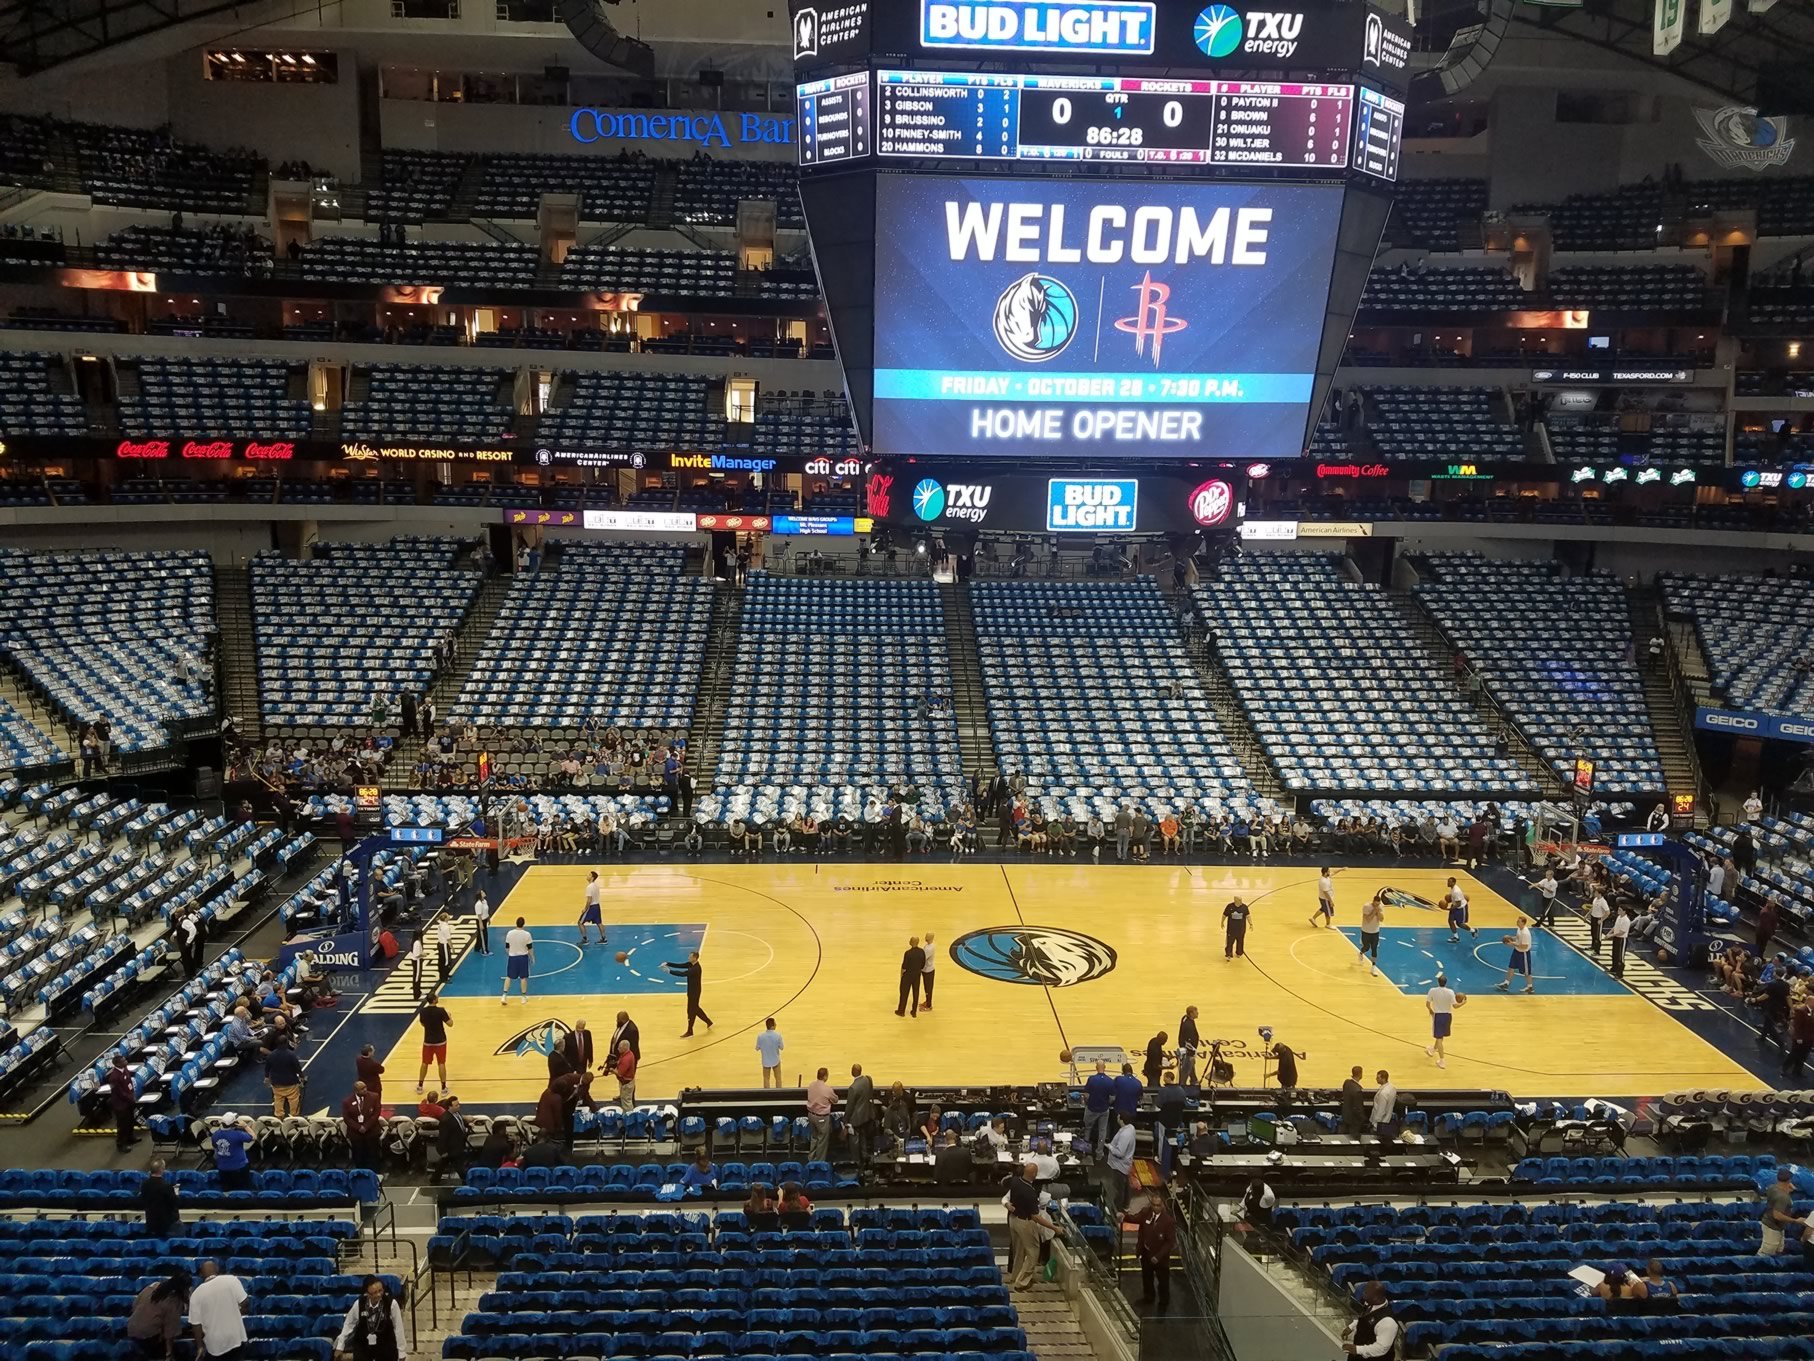 section 218, row a seat view  for basketball - american airlines center